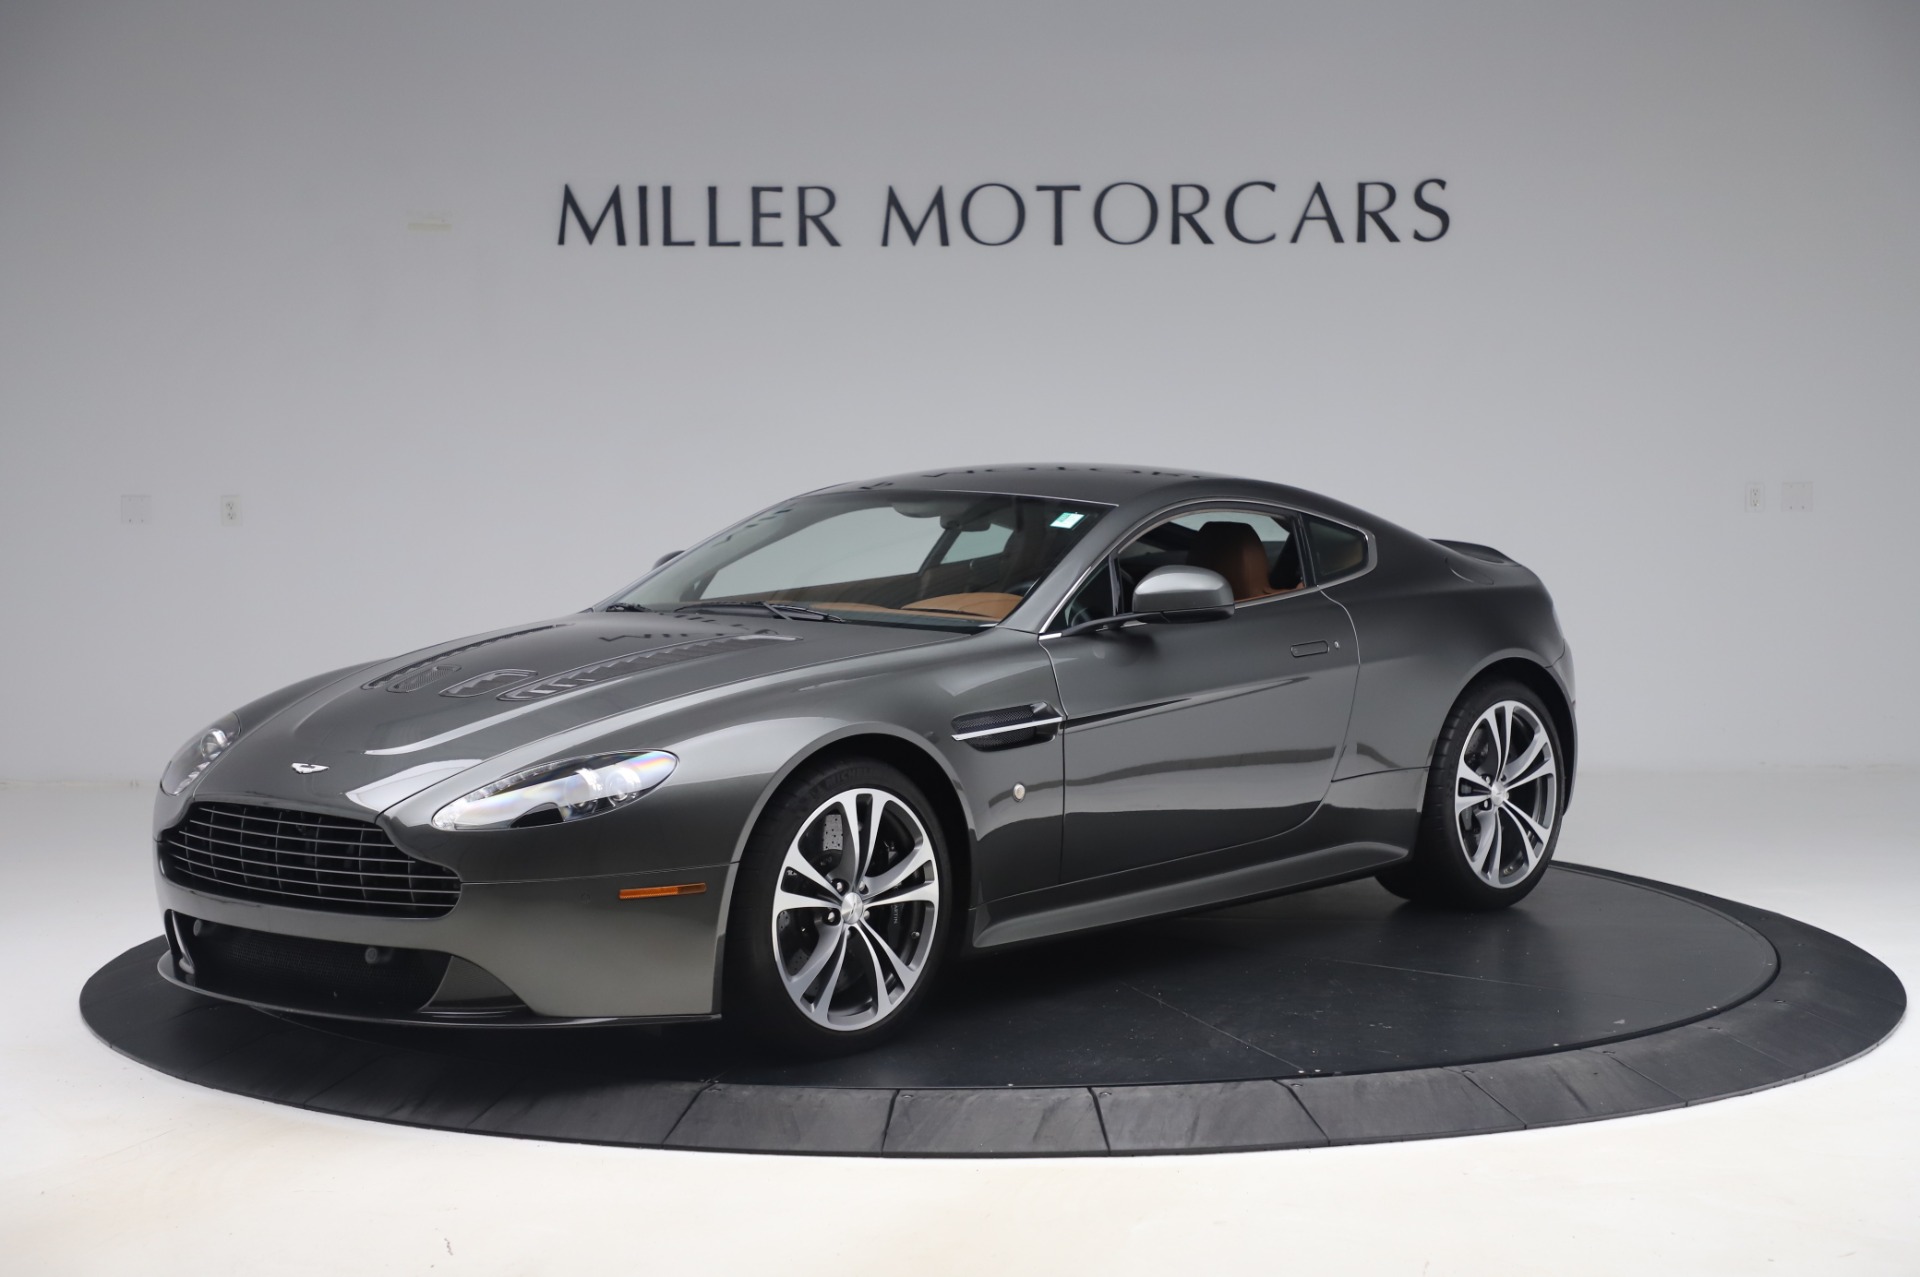 Used 2011 Aston Martin V12 Vantage Coupe for sale Sold at Maserati of Westport in Westport CT 06880 1